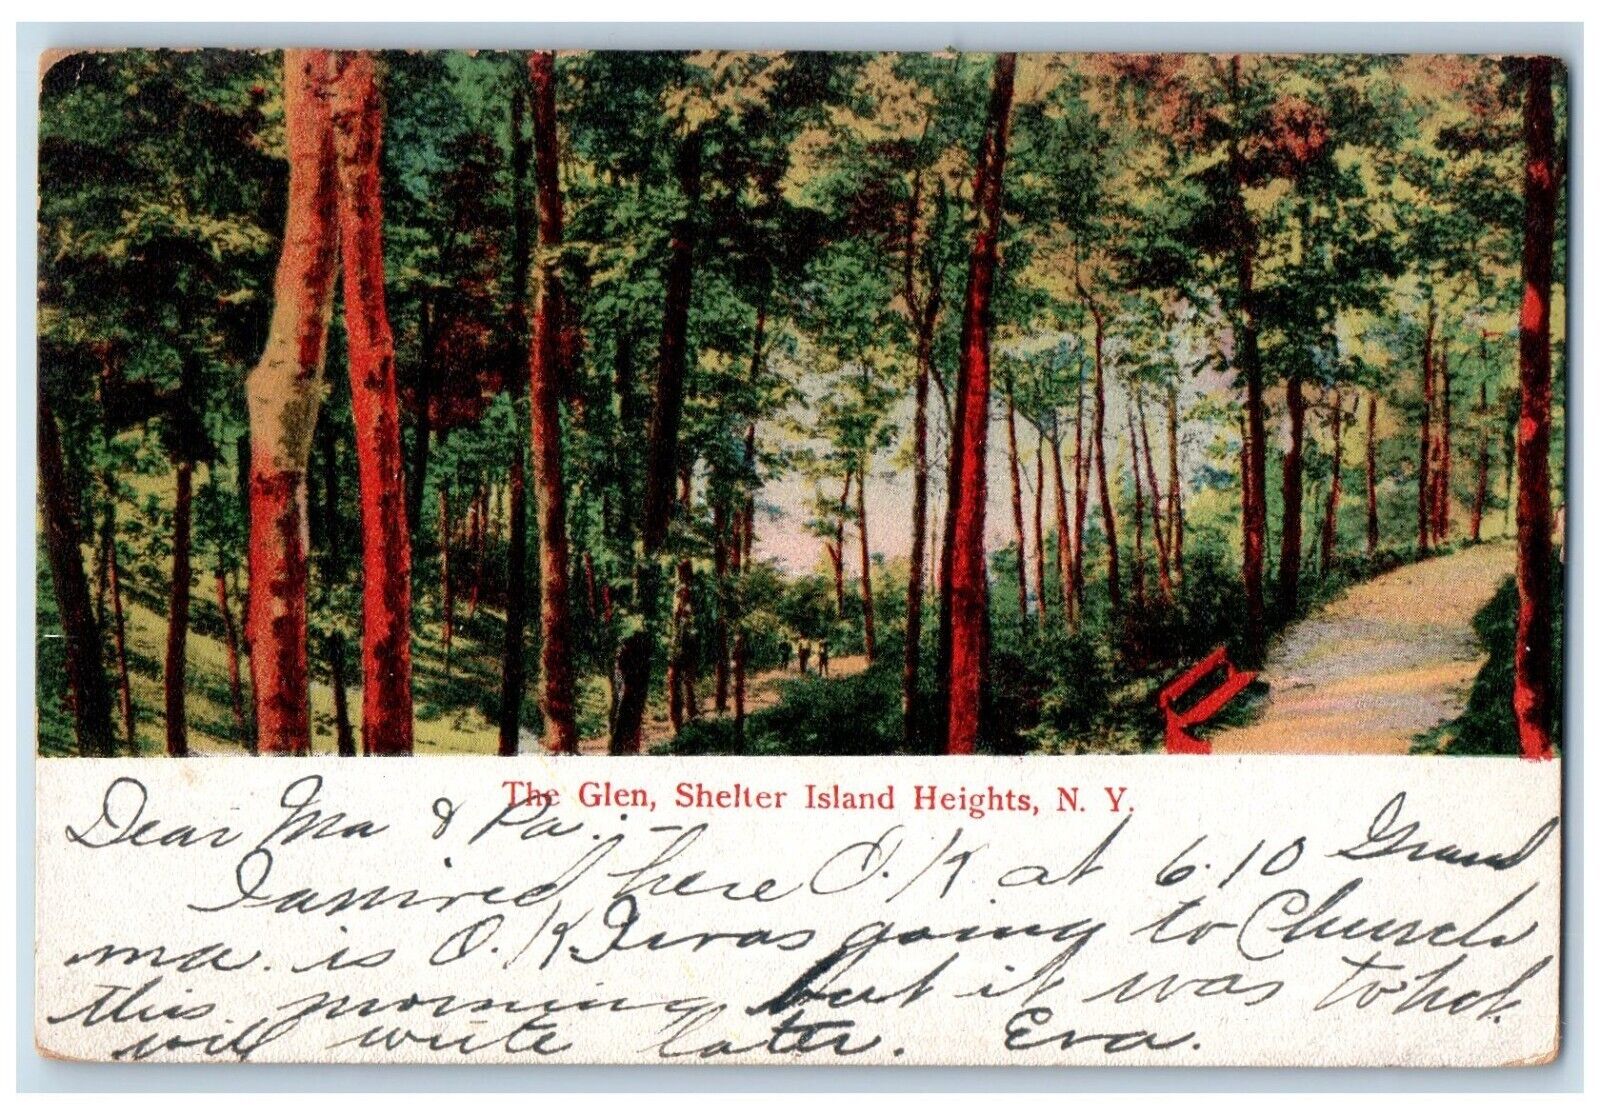 1908 The Glen Wood Path Tree Shelter Island Heights New York NY Antique Postcard